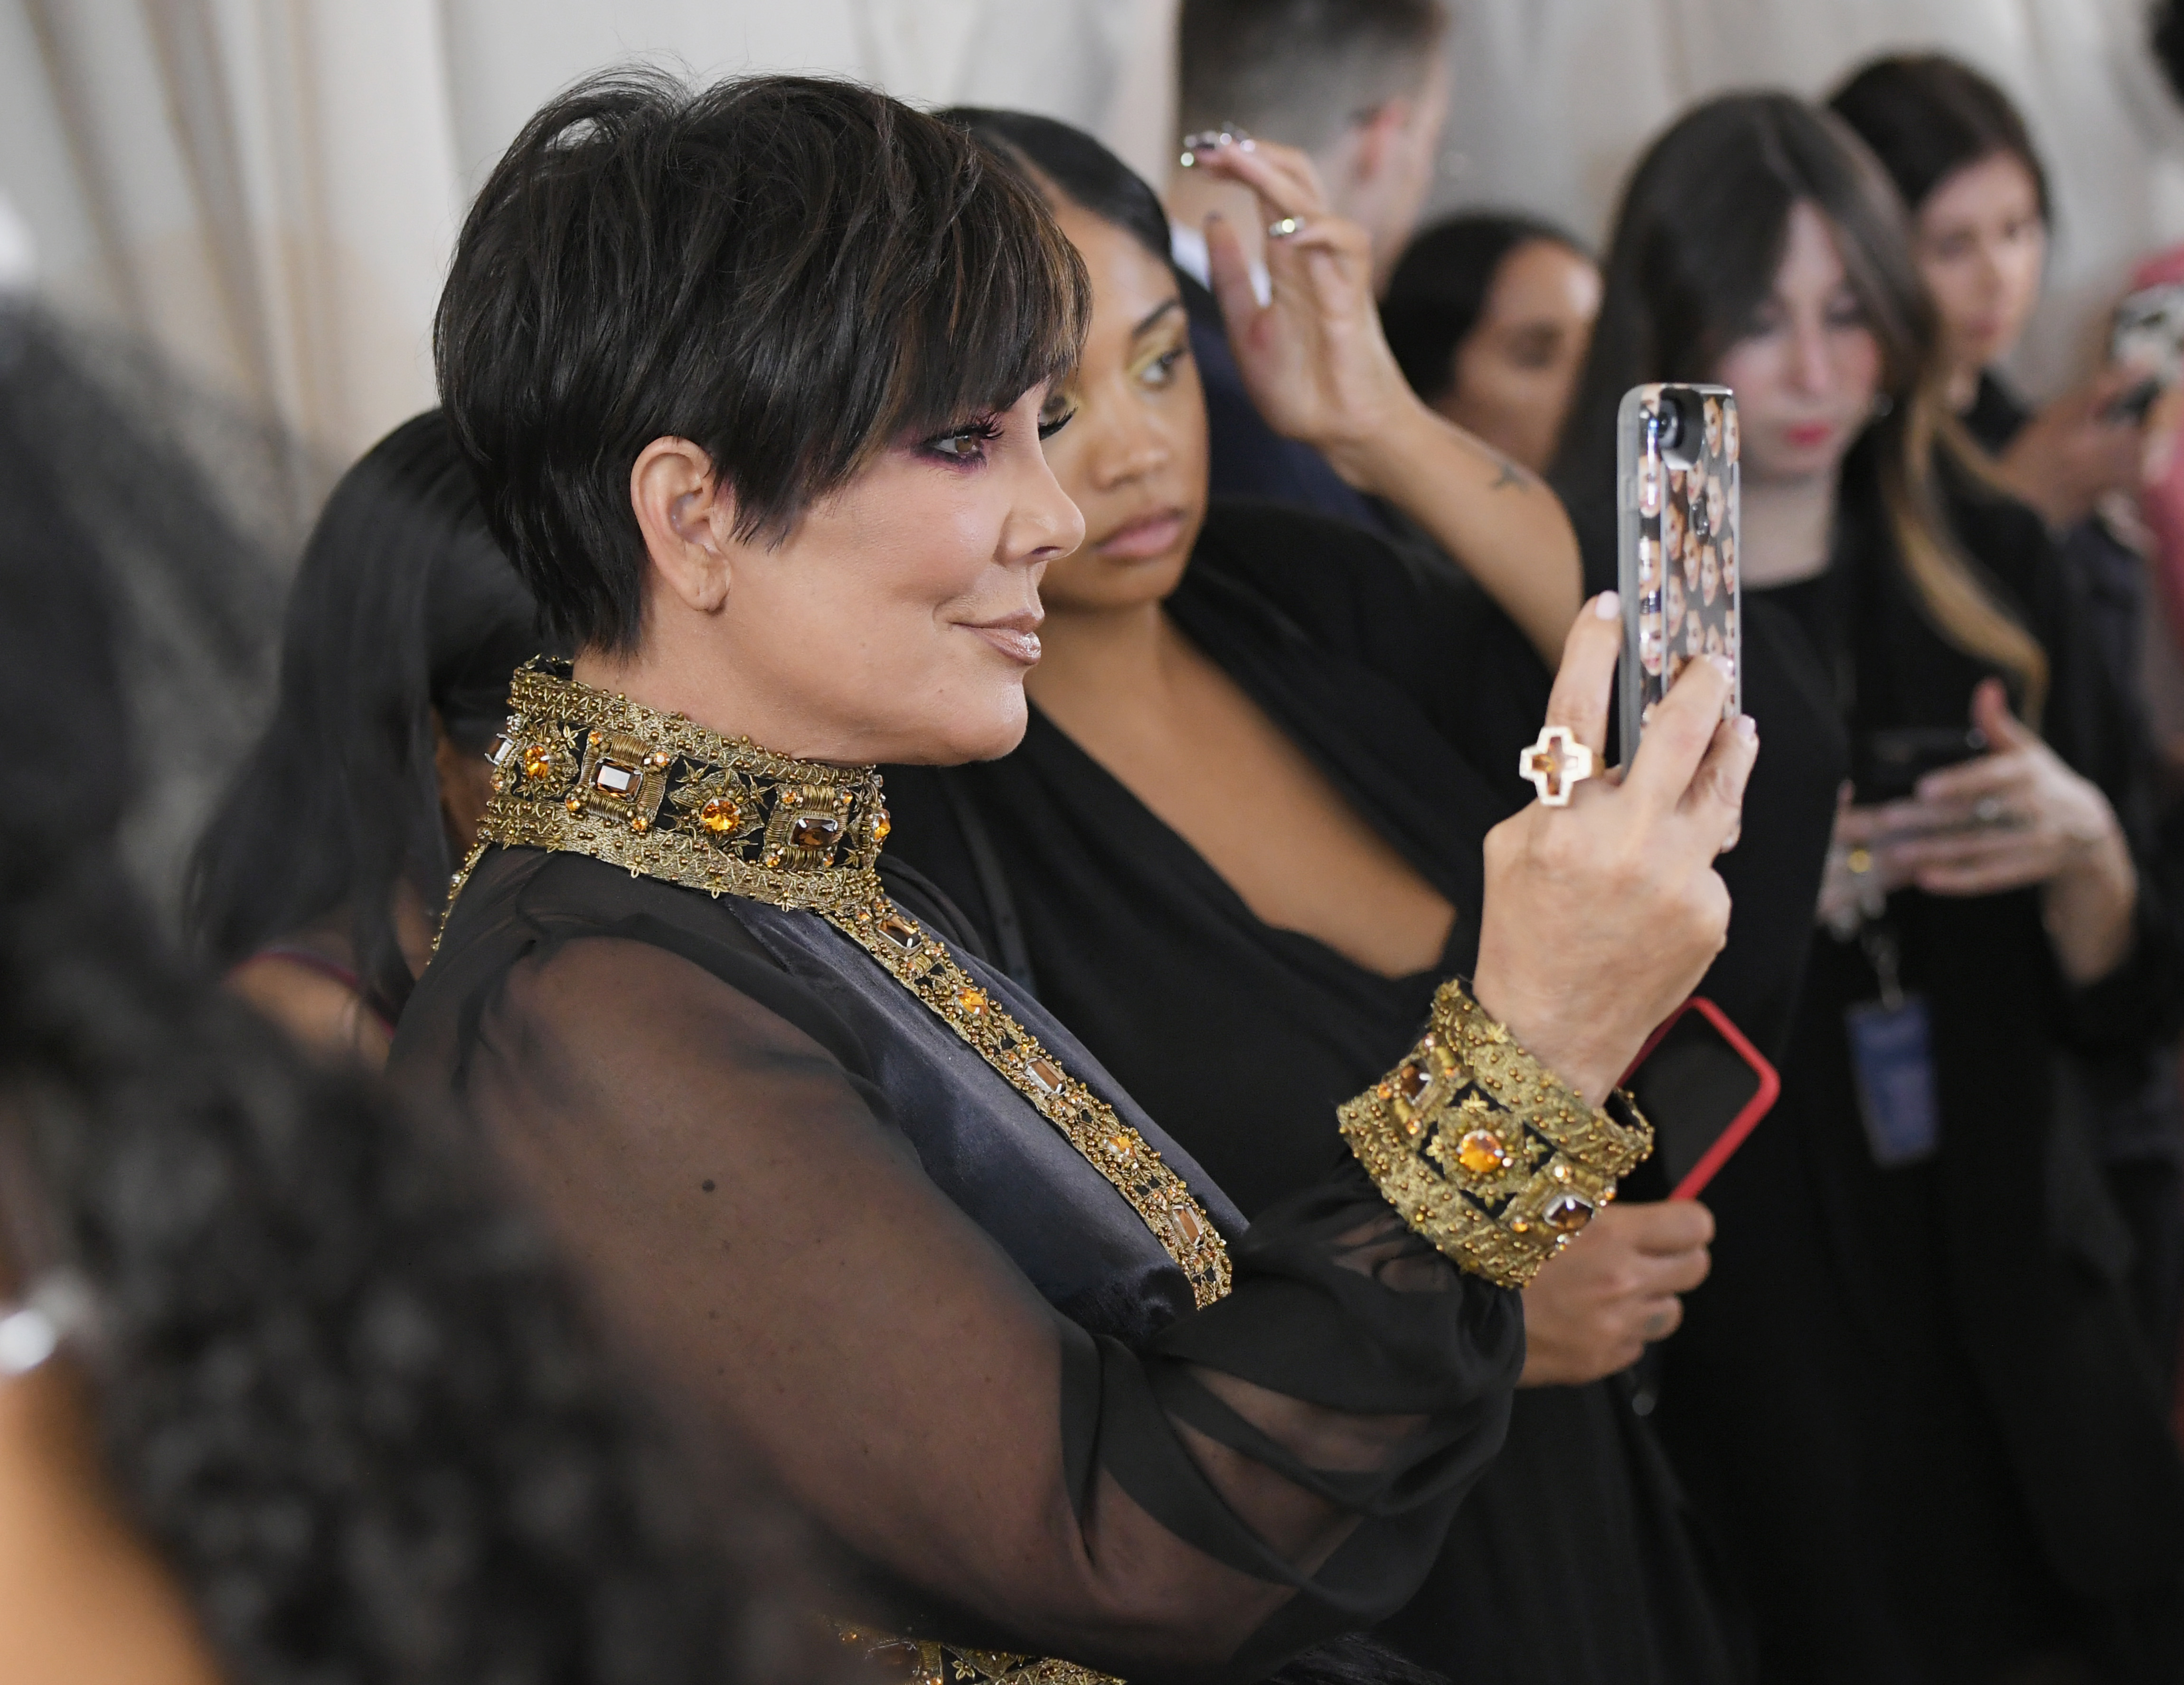 Kris Jenner attends the Heavenly Bodies: Fashion &amp; The Catholic Imagination Costume Institute Gala at The Metropolitan Museum of Art on May 7, 2018 in New York City. (Mike Coppola/MG18&mdash;Getty Images for The Met Museum/Vogue)